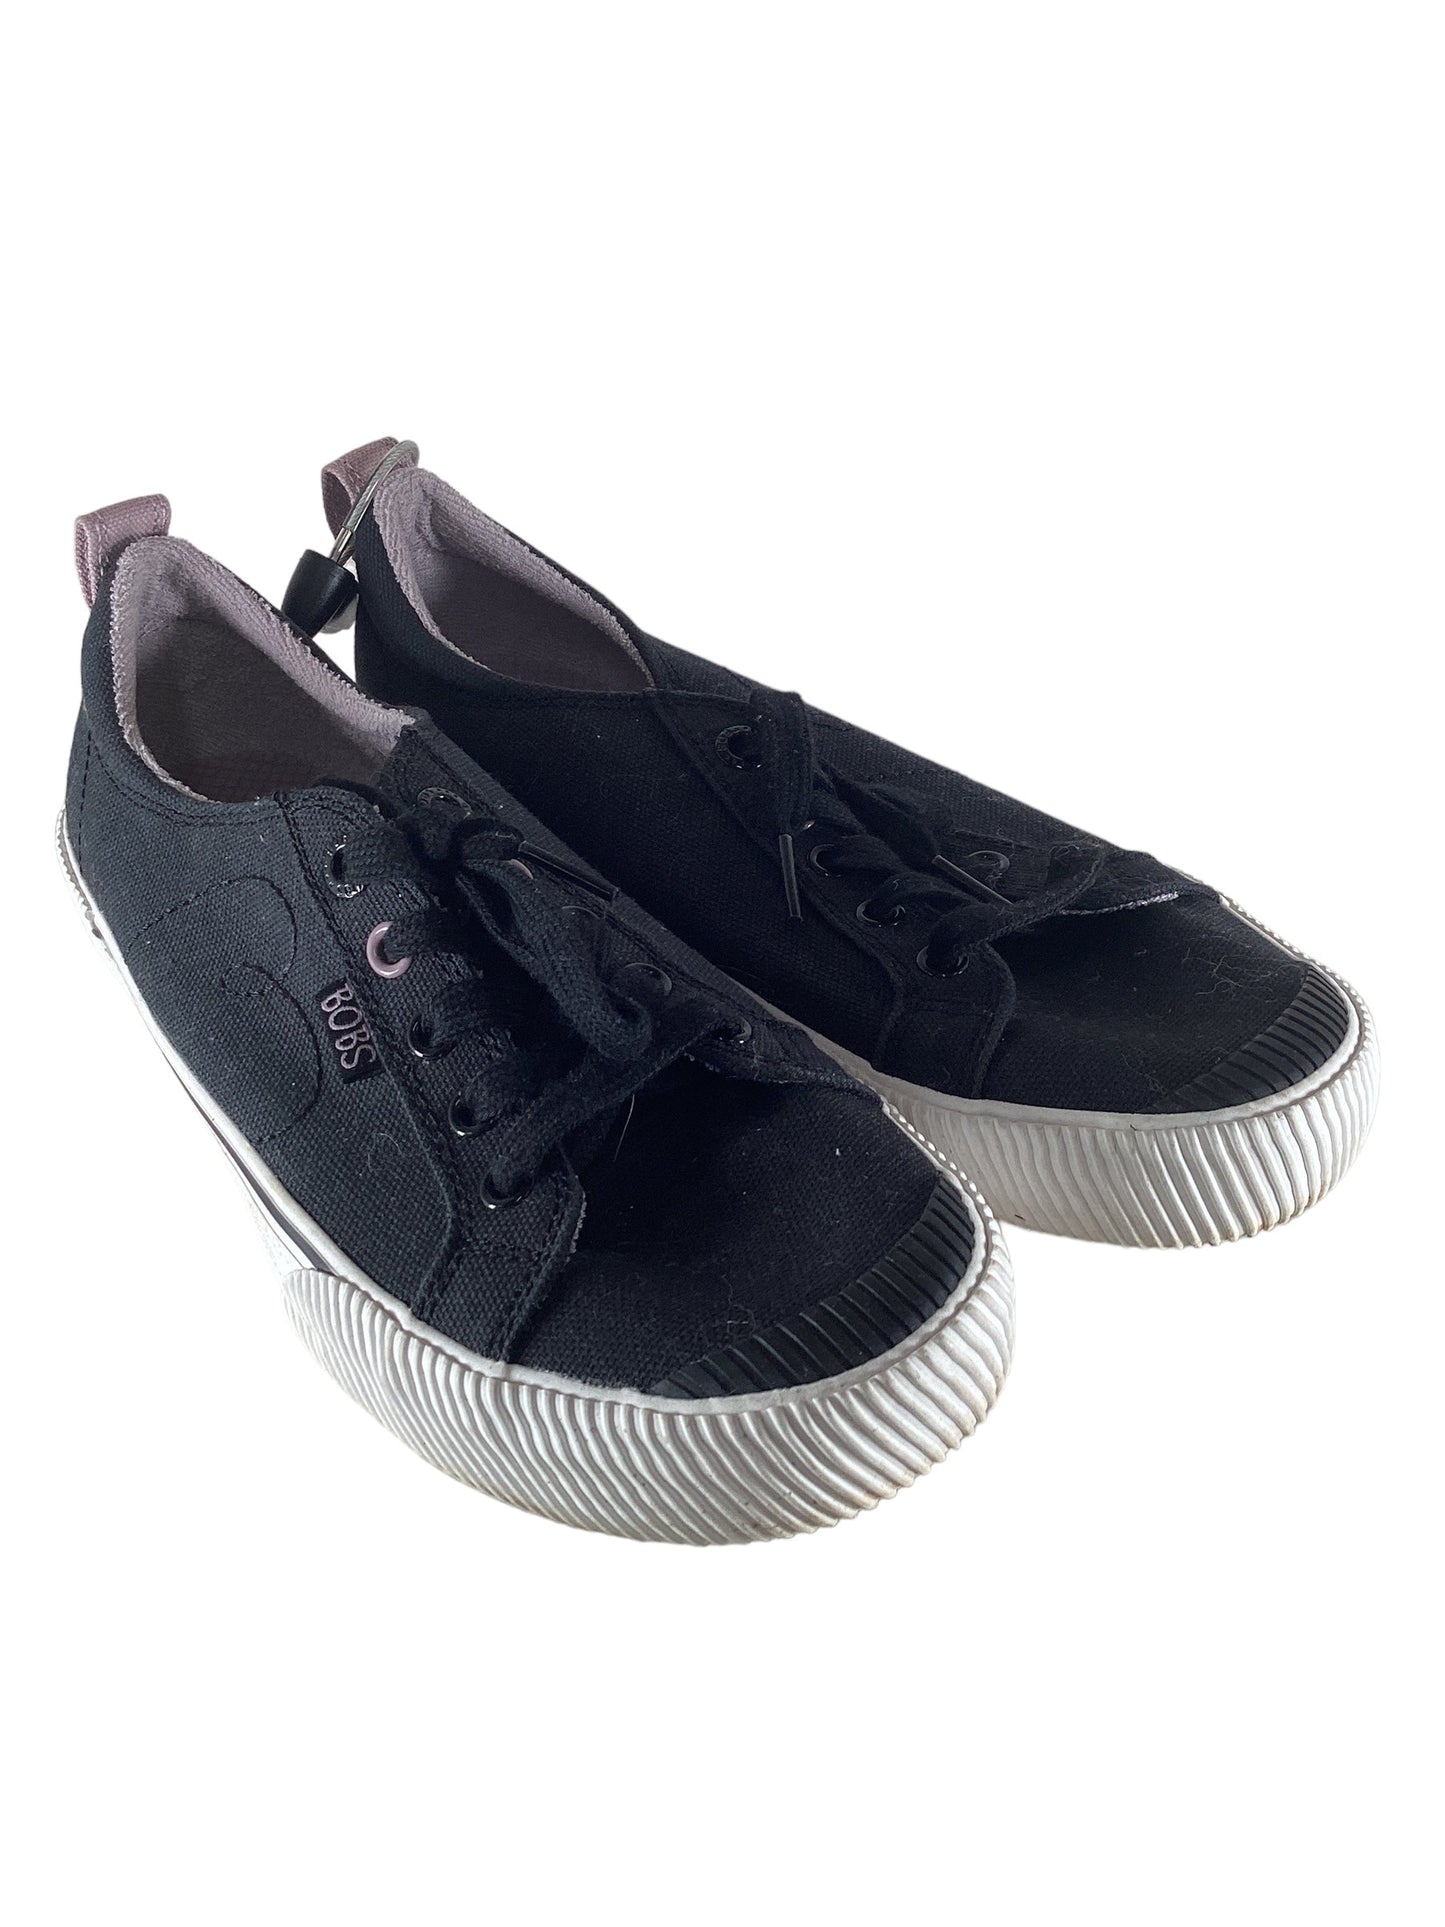 Black Shoes Sneakers Bobs, Size 8